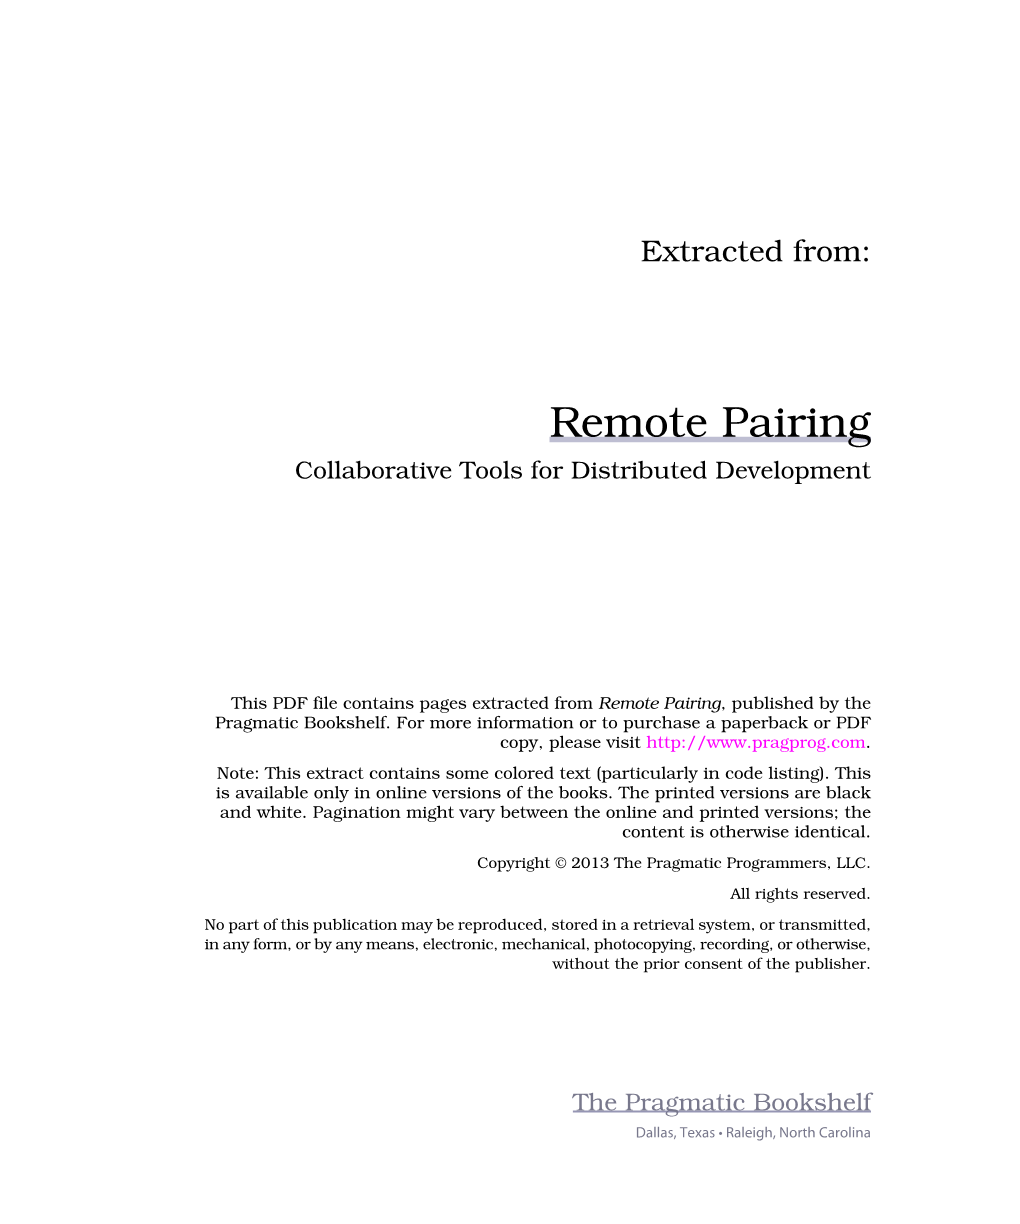 Remote Pairing Collaborative Tools for Distributed Development